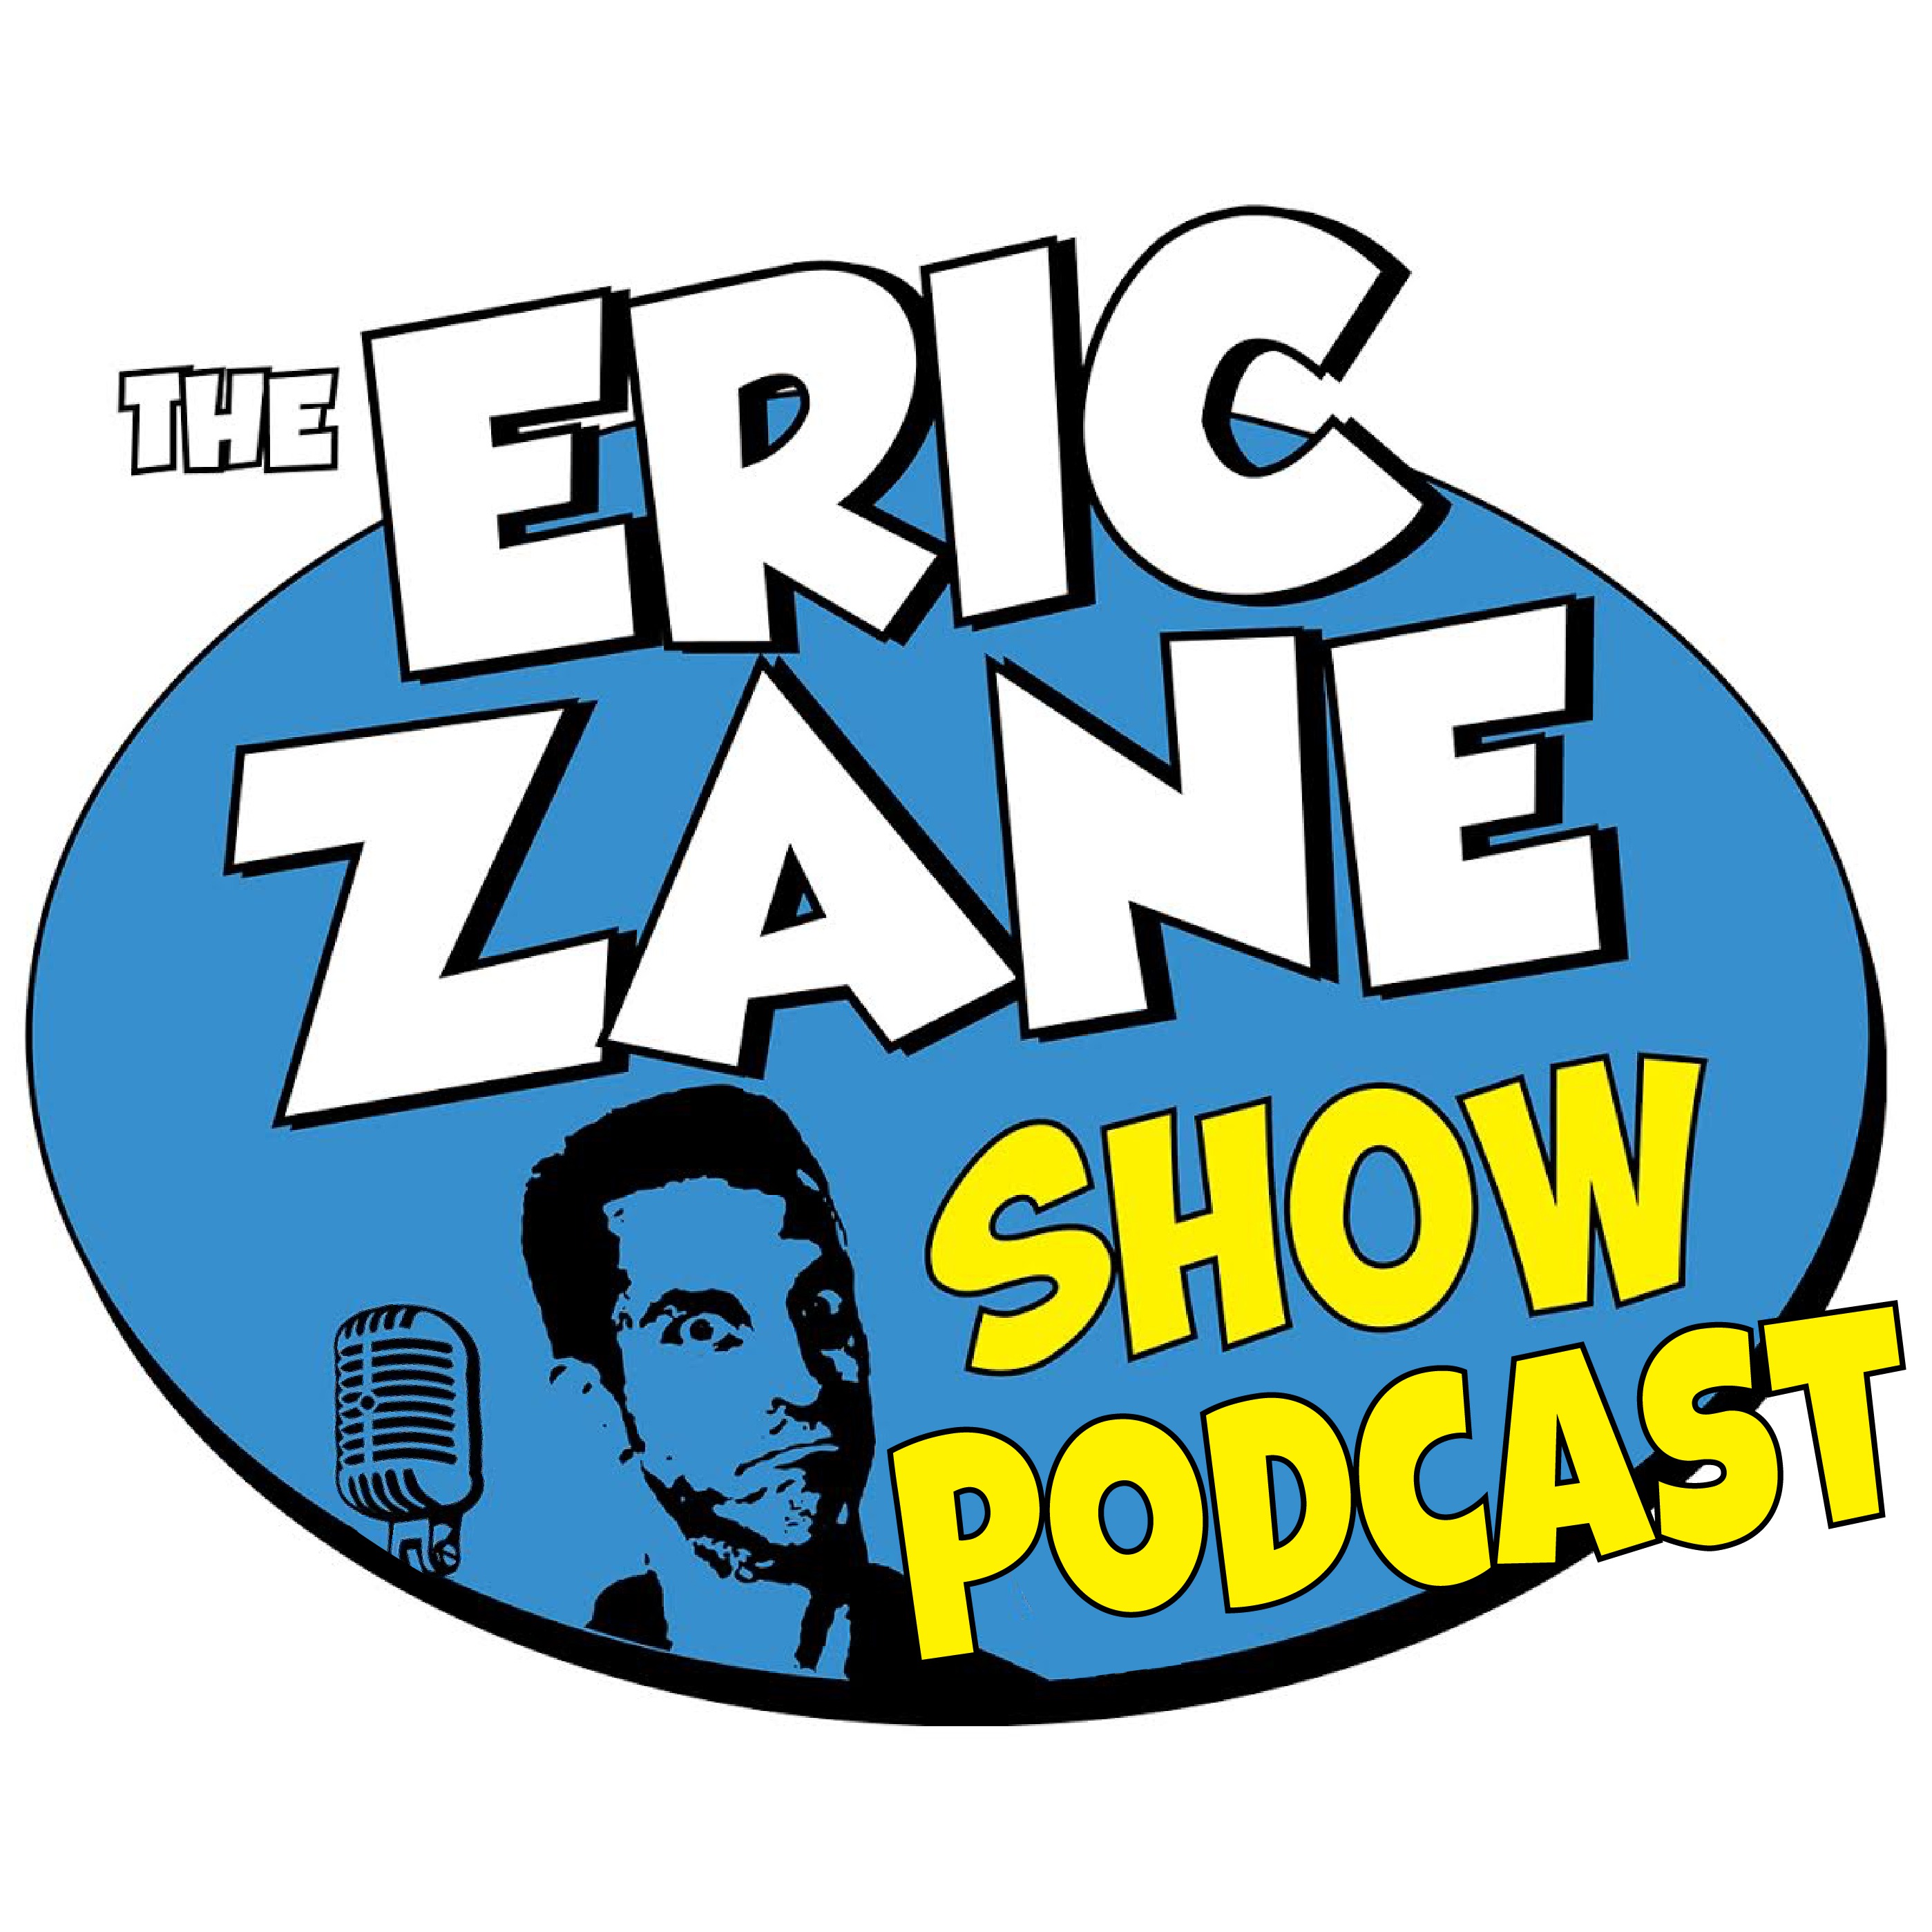 Best of the Eric Zane Show Podcast 5/27/22